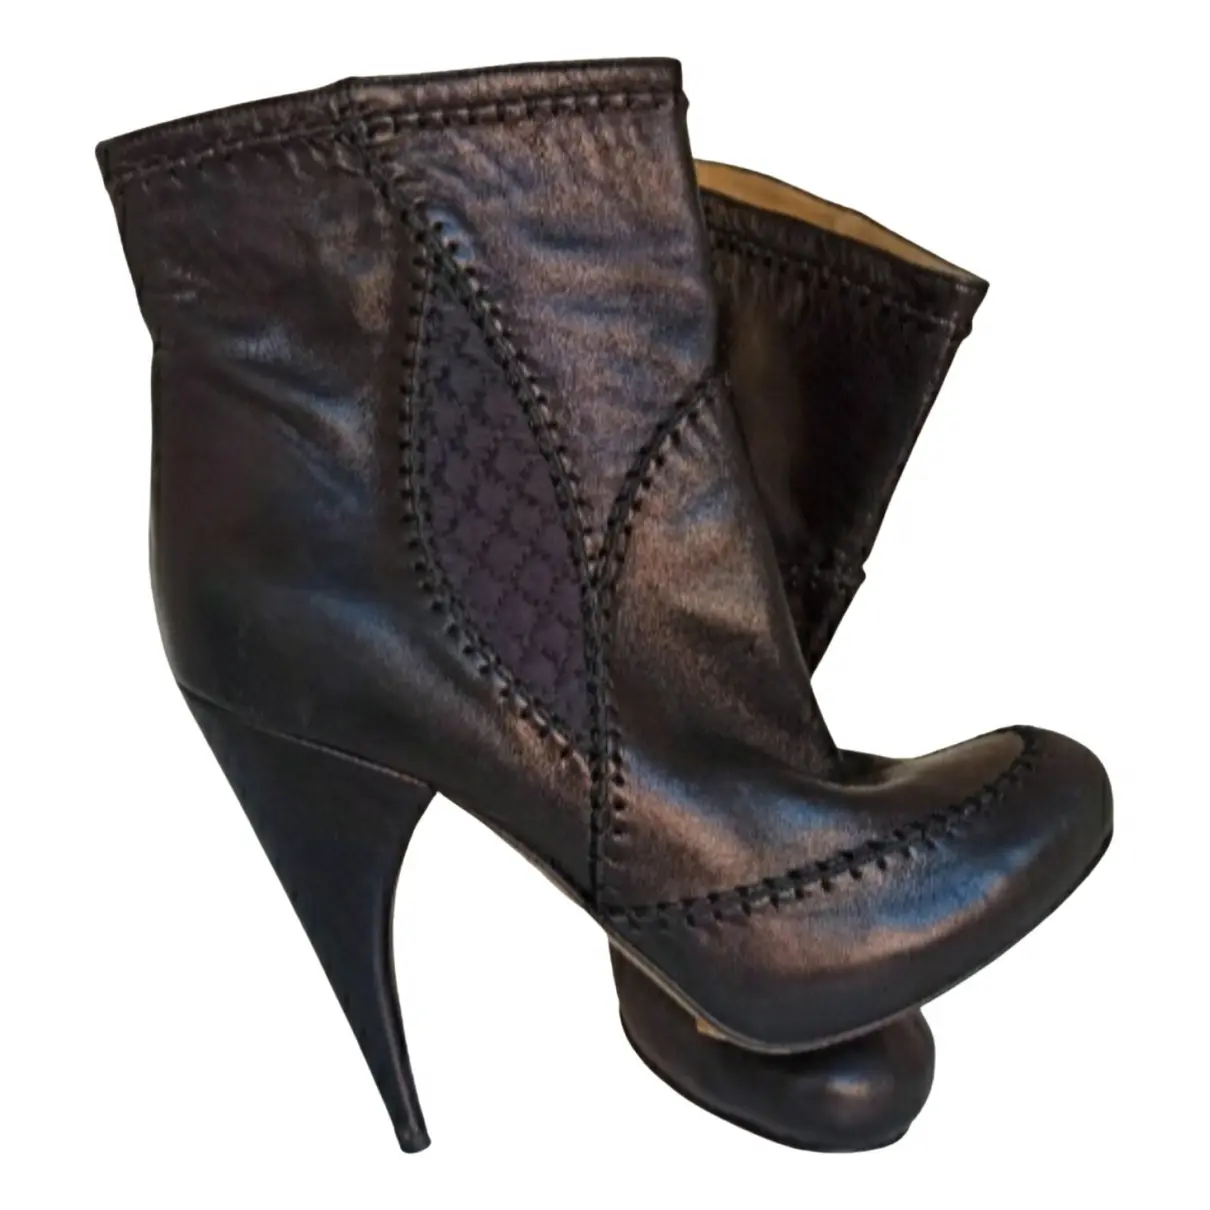 Leather ankle boots Galliano - Vintage